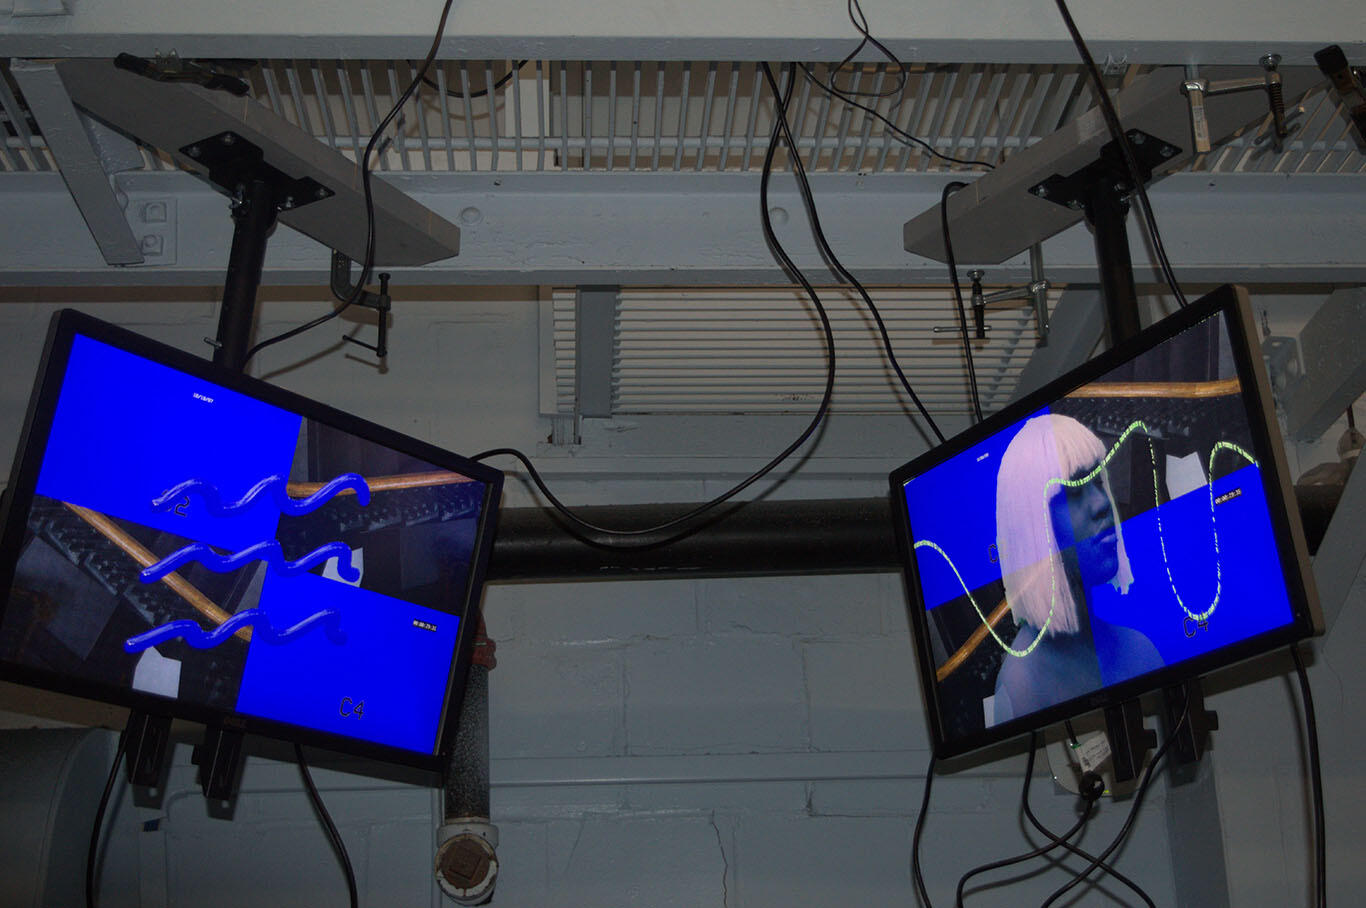 Two ceiling-mounted screens show a deep violet wave symbol (left) and a blue figure with white hair (right). Both have a background resembling a four-panel security monitor.